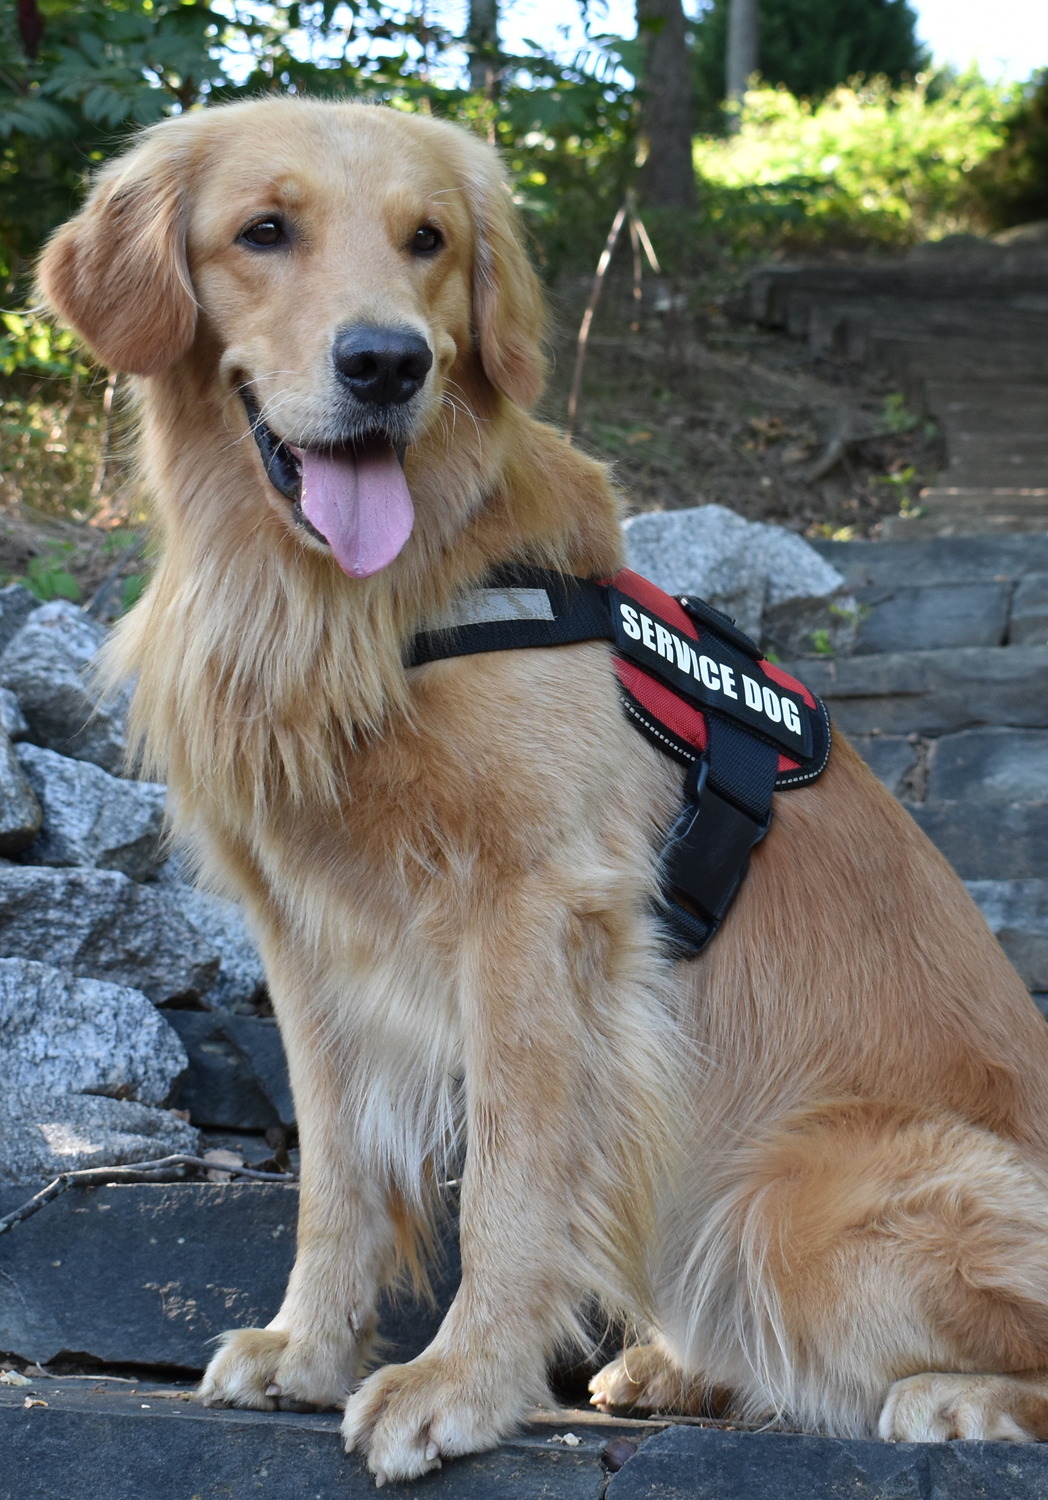 Gallery Photo of Meet Finn. Finn is a Golden Retriever and a certified Service Dog who works with me in my office. He provides a gentle, loving presence in sessions!